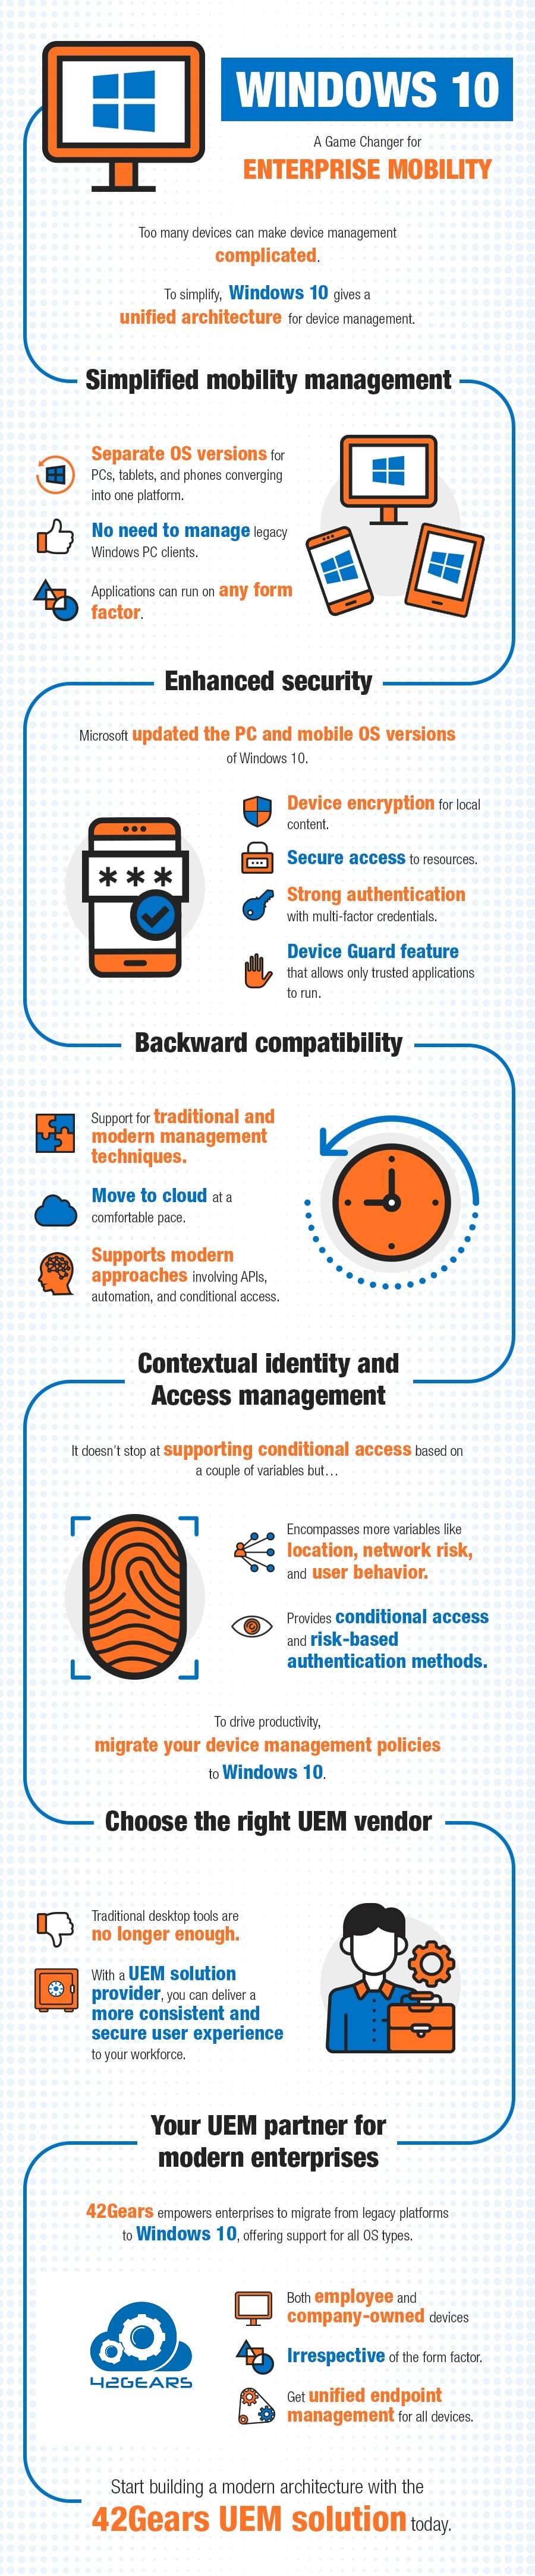 Windows 10 A Game Changer for Enterprise Mobility Infographic